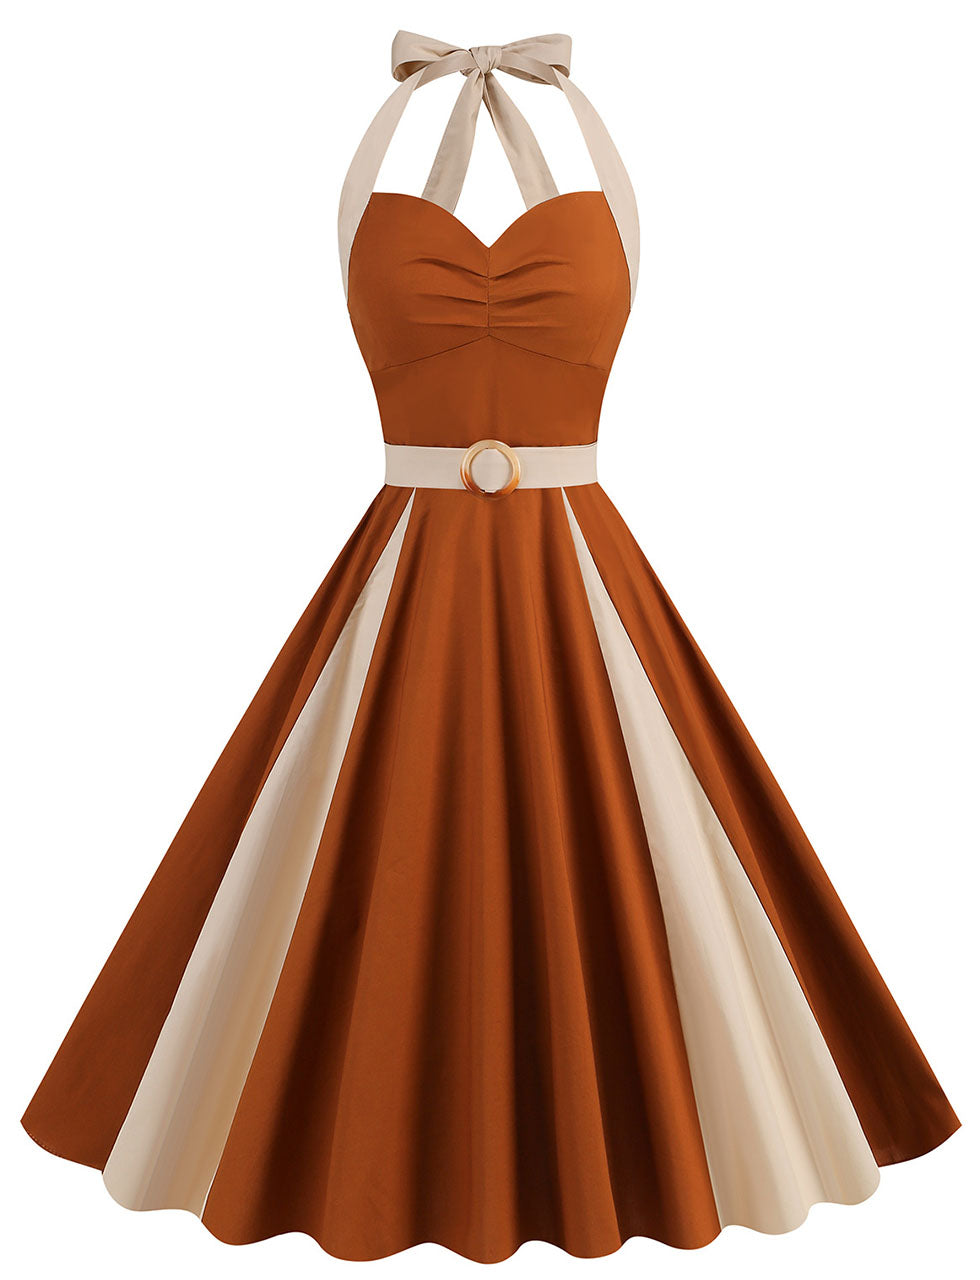 Two-tone Colorblock Halter Neck Vintage Dress  Inspired by Mrs.Maisel